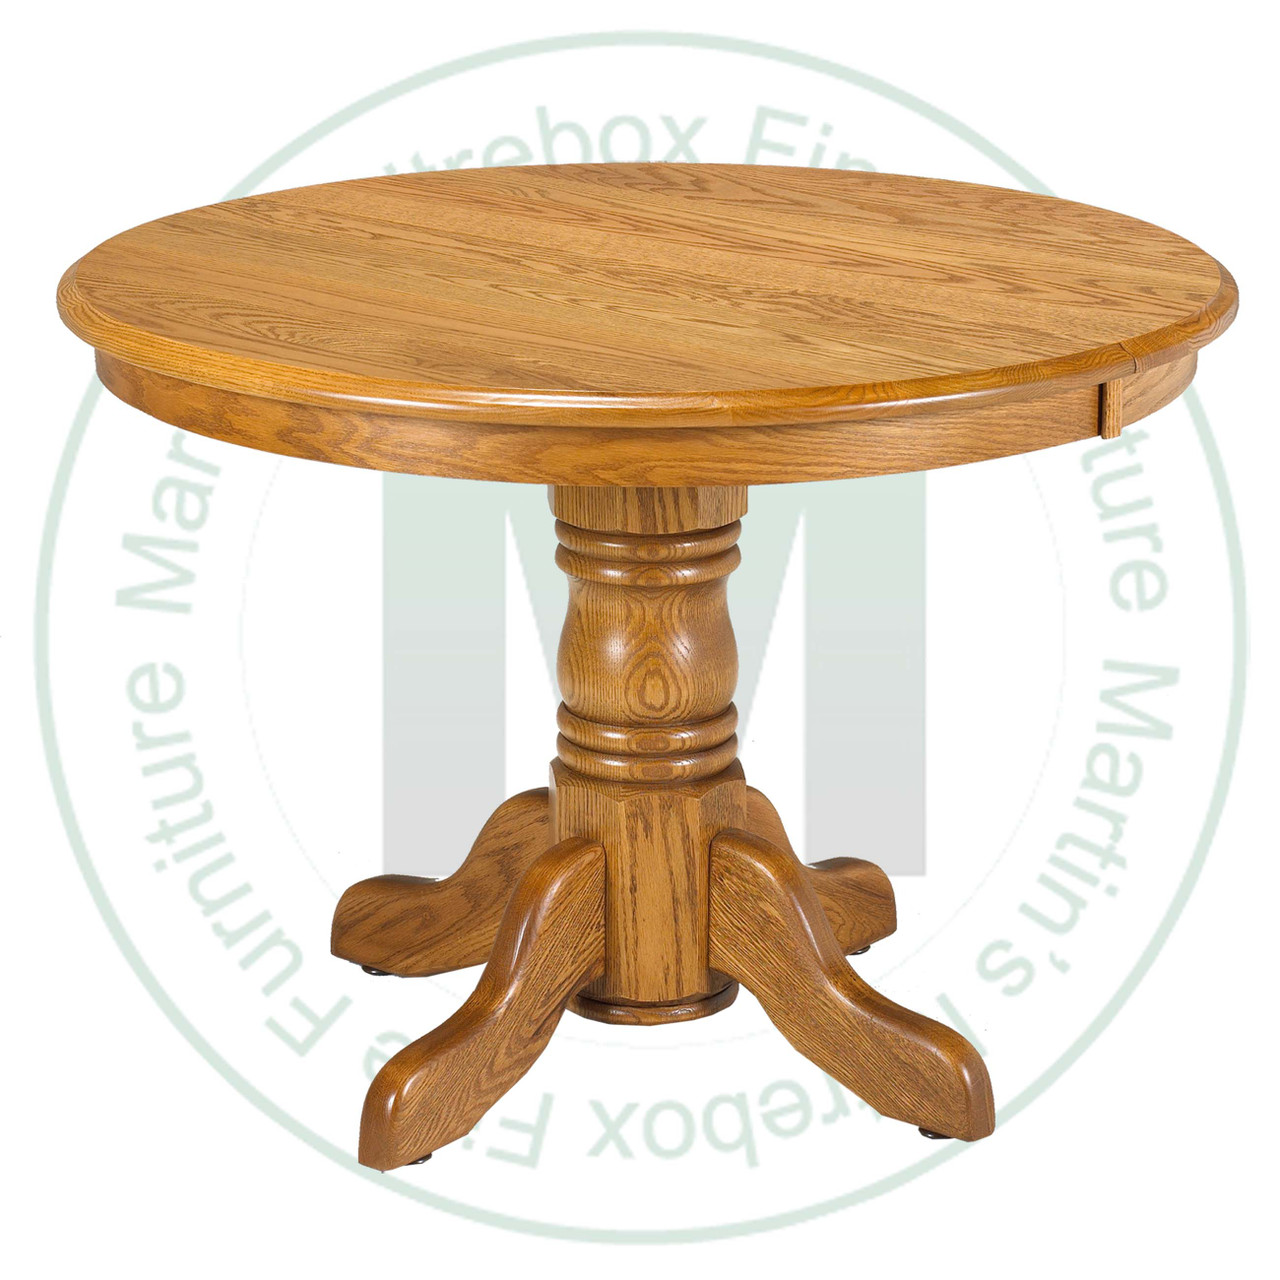 Maple Lancaster Collection Single Pedestal Table 36''D x 42''W x 30''H  Round Solid Table. Table Has 1.25'' Thick Top